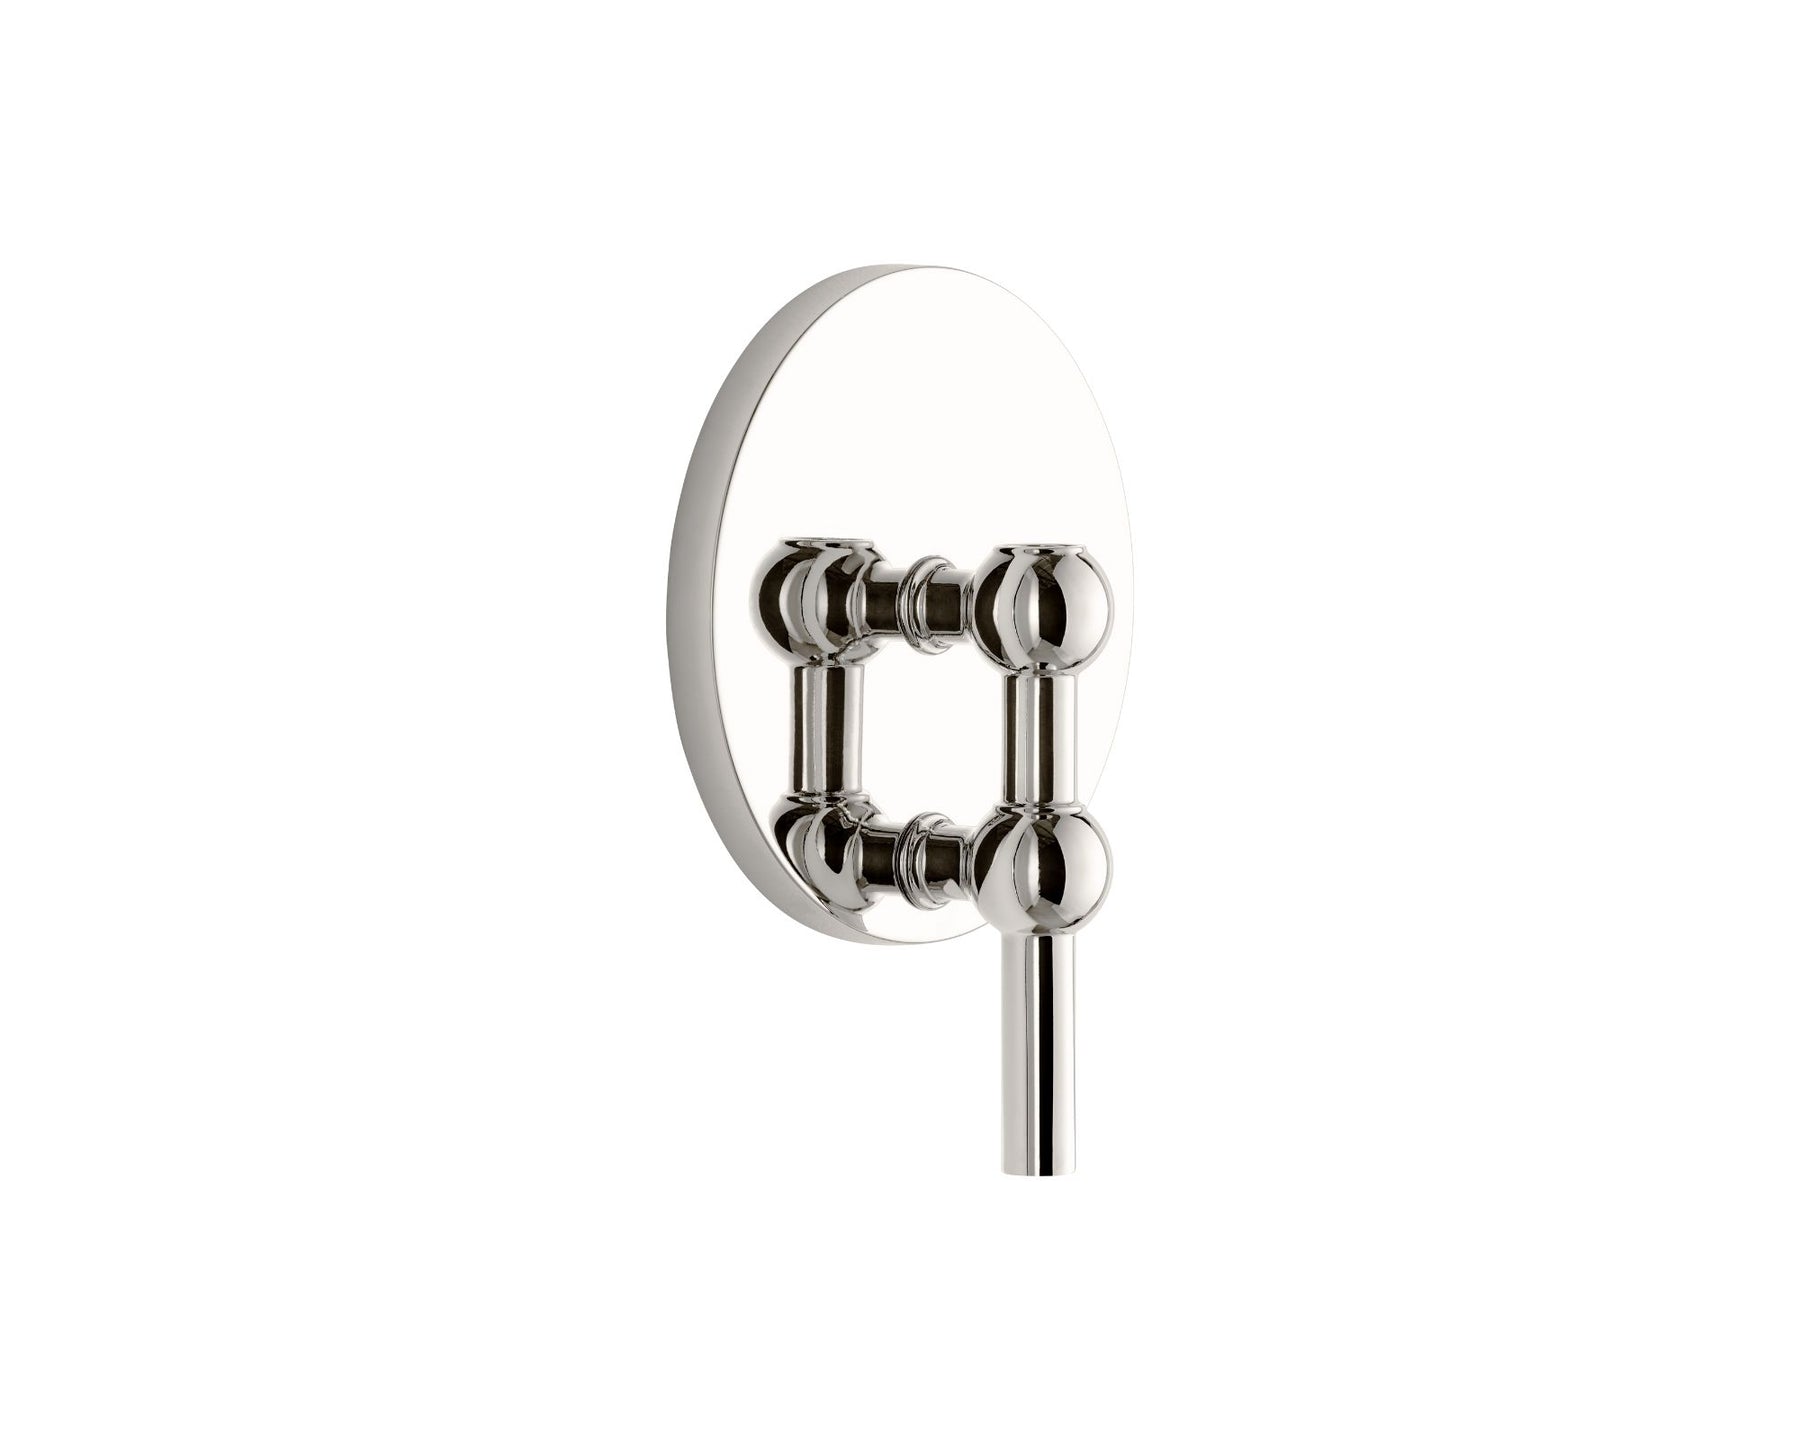 Stoff Nagel Wall Hanger - Chrome Modular Candle Sconce